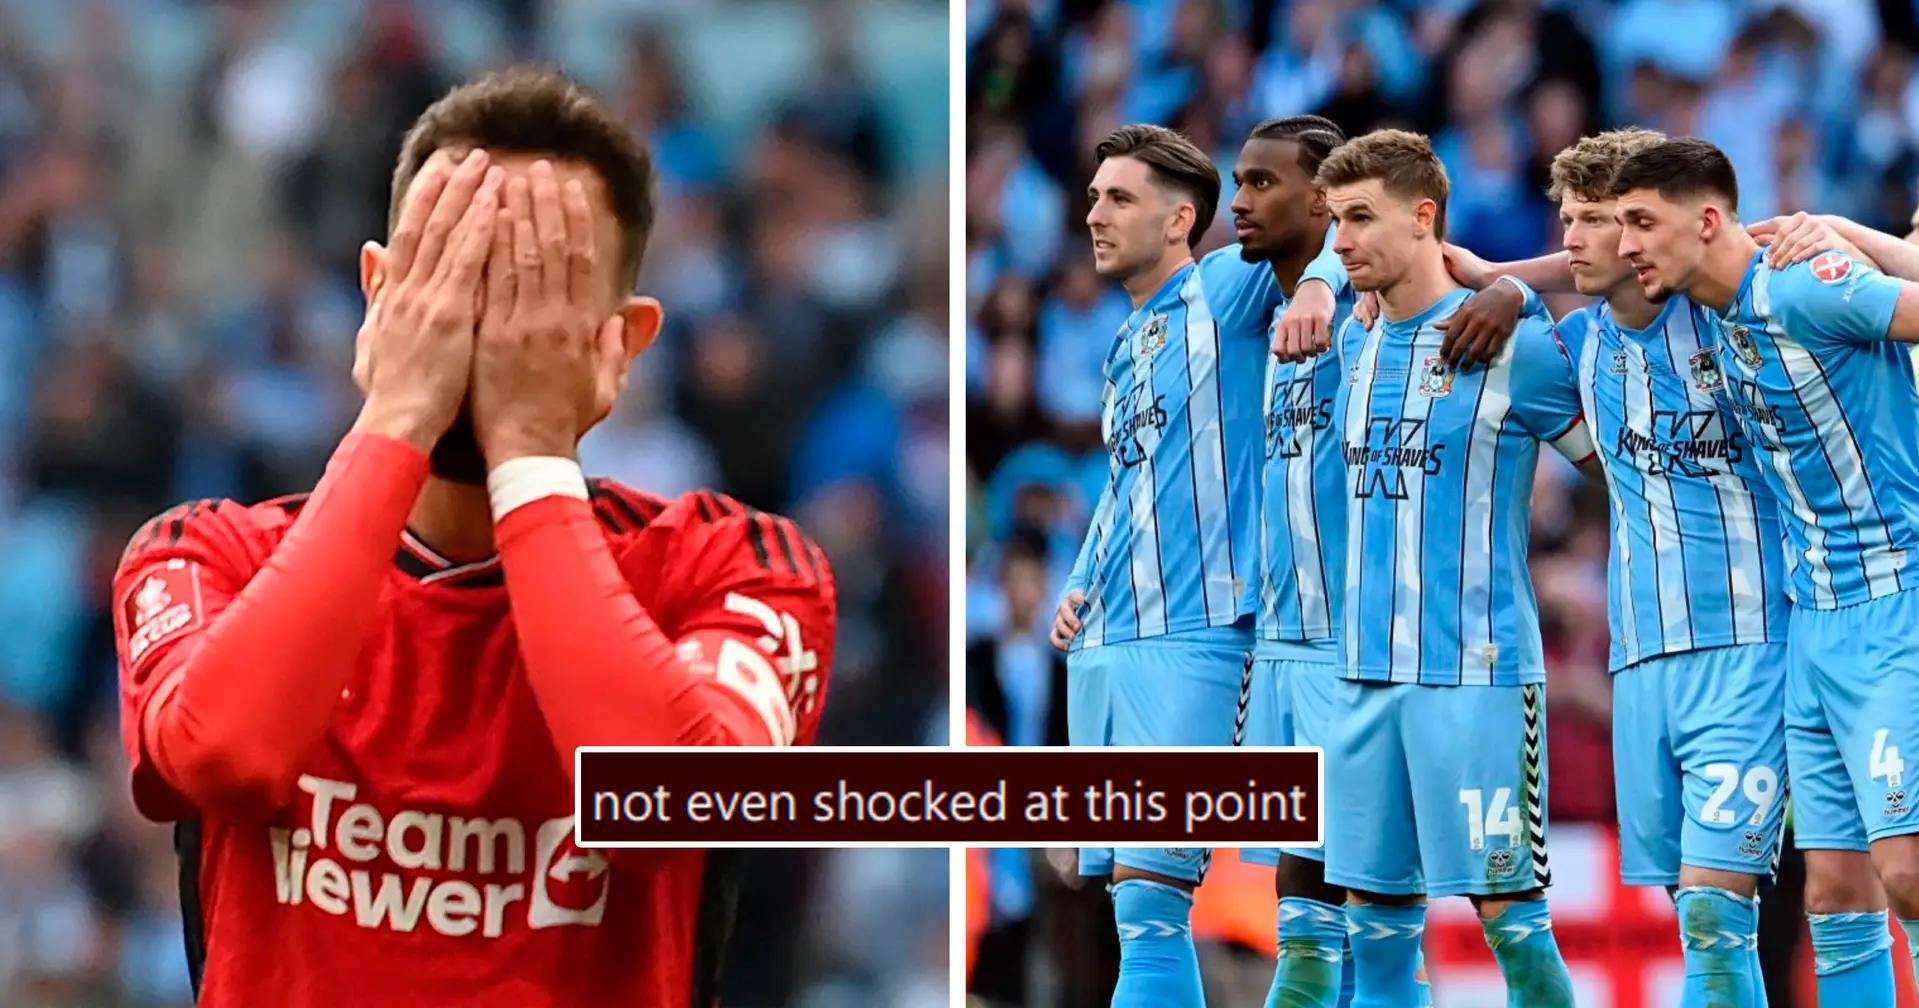 "I really wish Coventry won that": fans are furious with United bottling a 3-0 lead against the Championship side